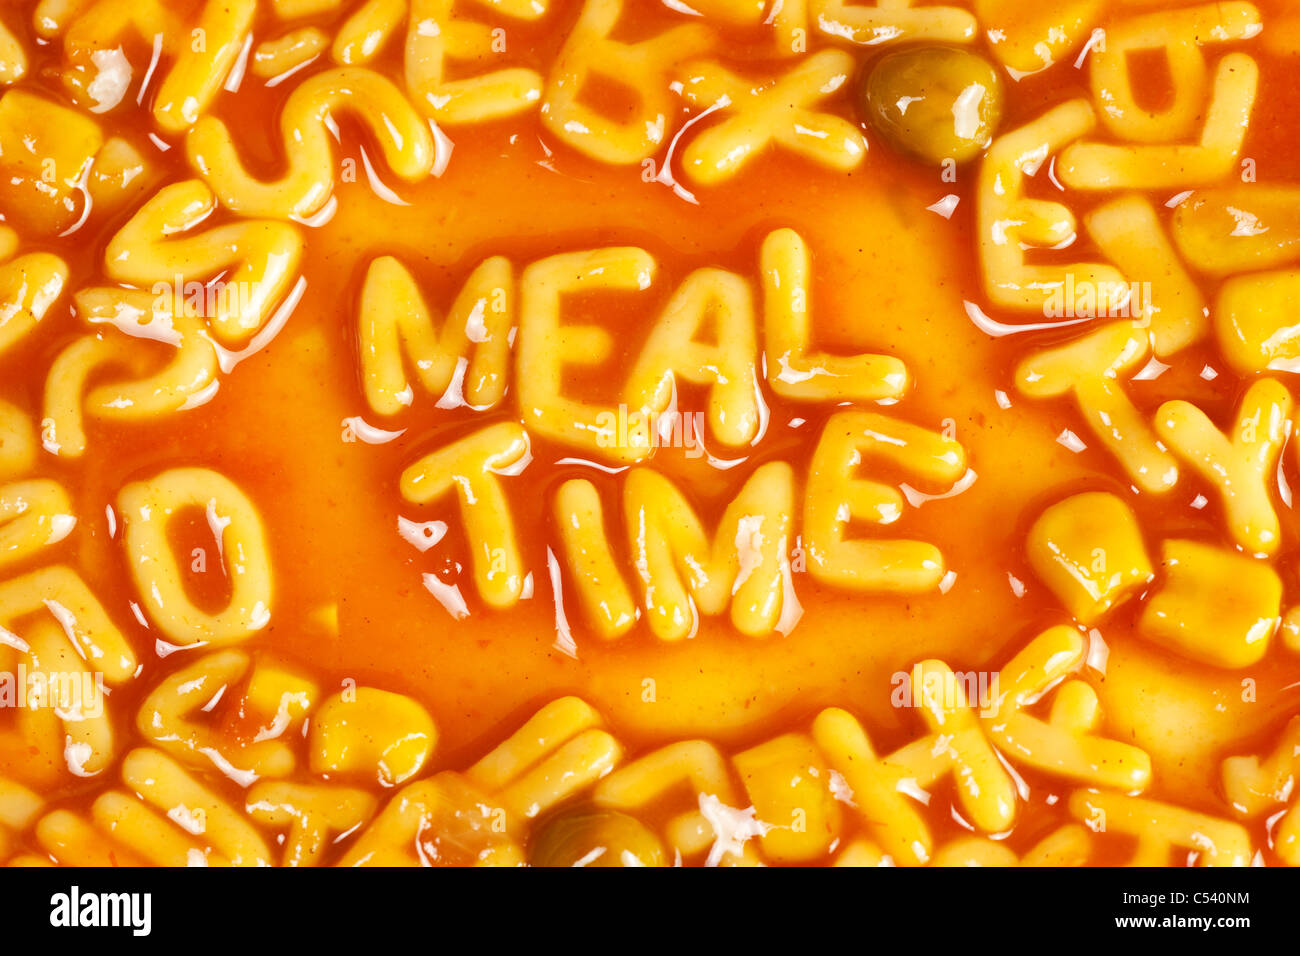 Alphabet shaped pasta forming the word MEALTIME in tomato sauce Stock Photo